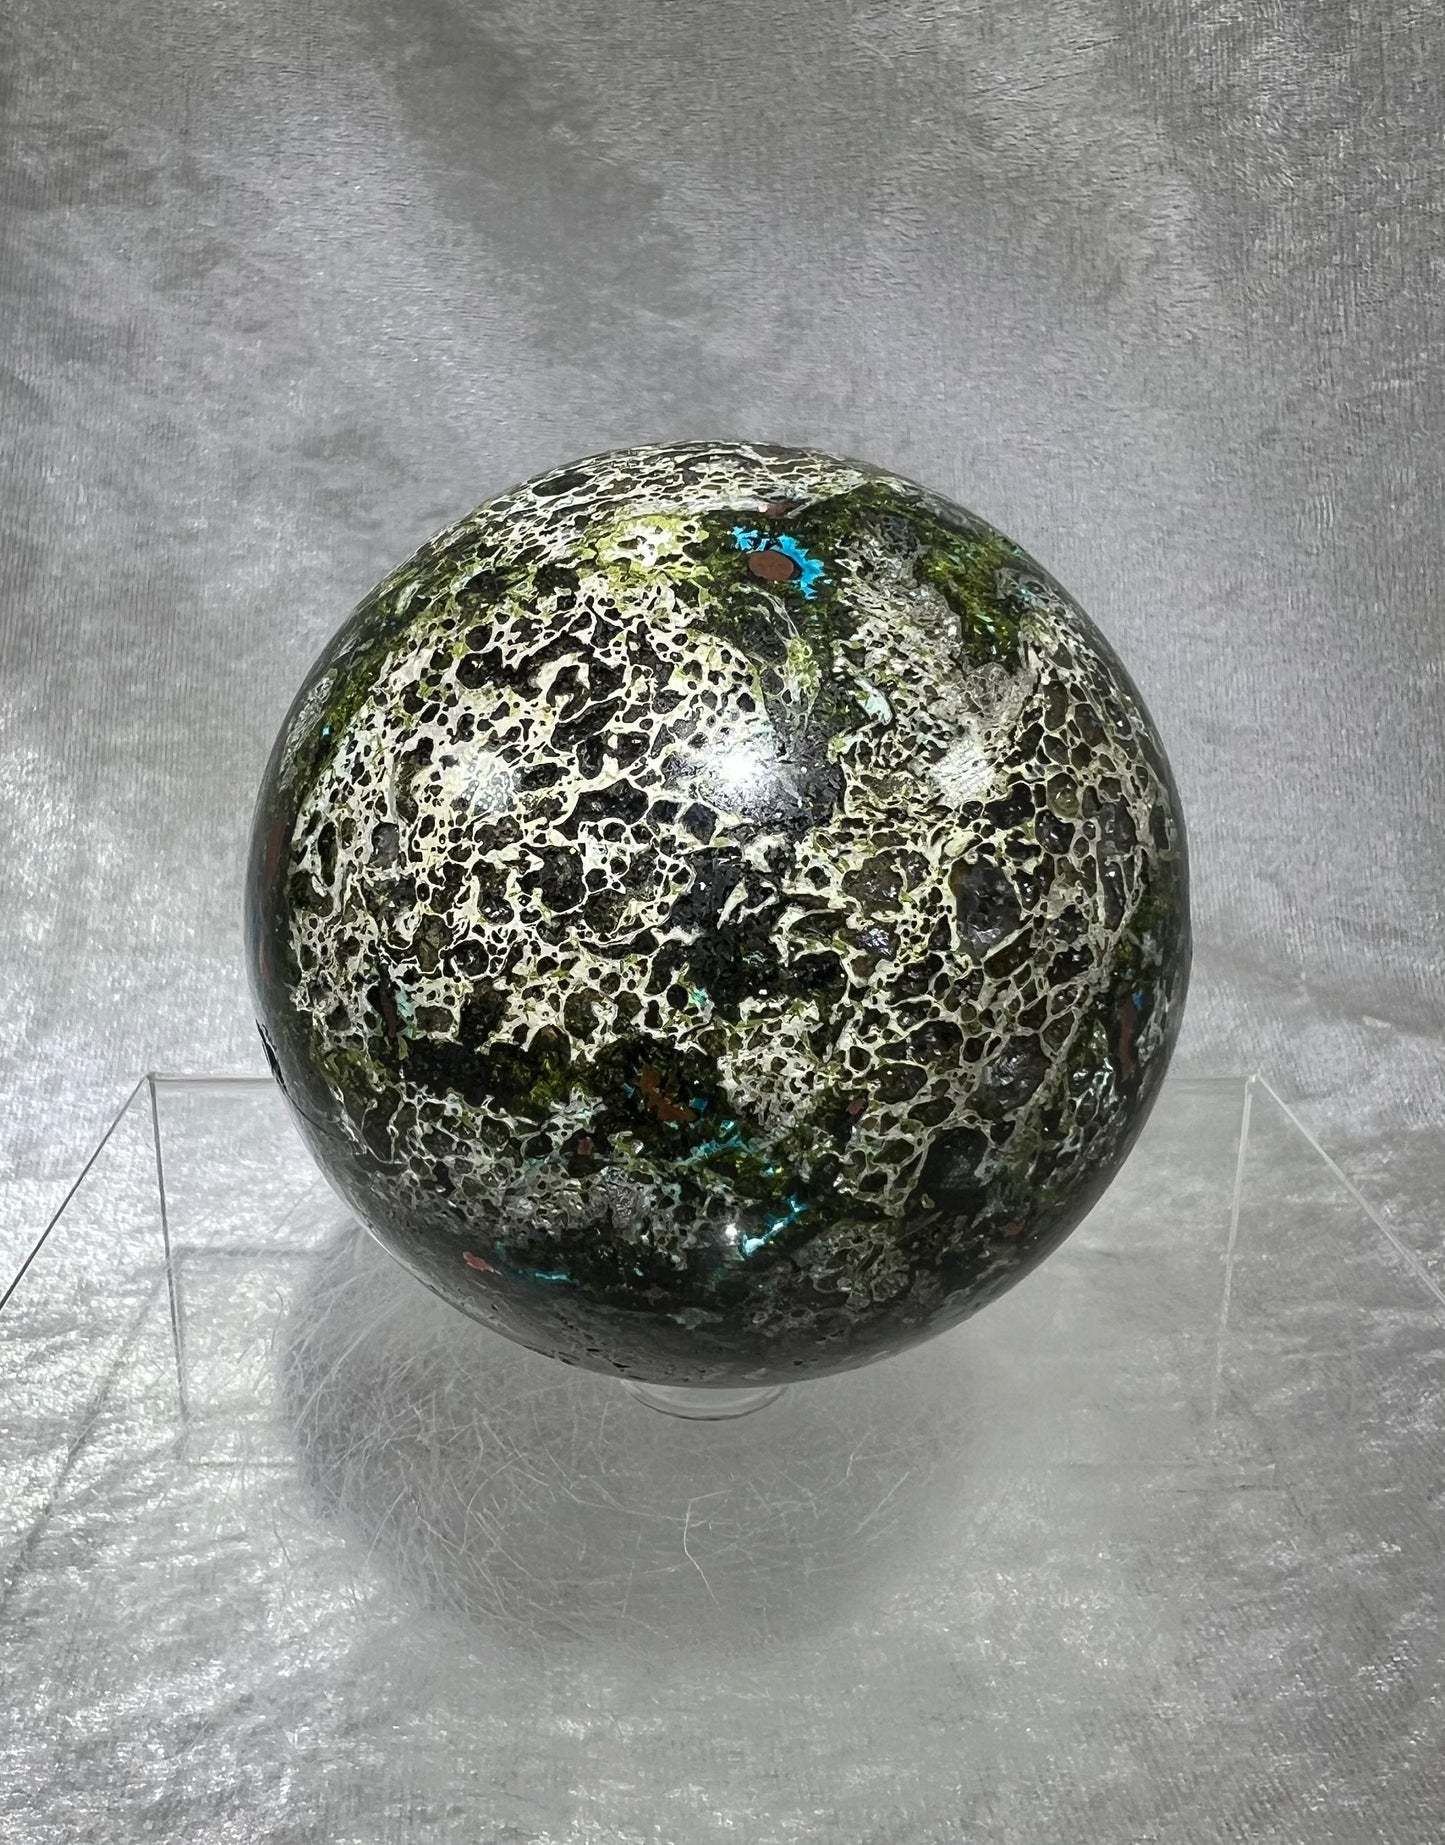 Stunning Large Epidote and Chrysocolla Sphere With Copper Inclusions. 80mm. Very Rare And High Quality. Awesome Collectors Piece!